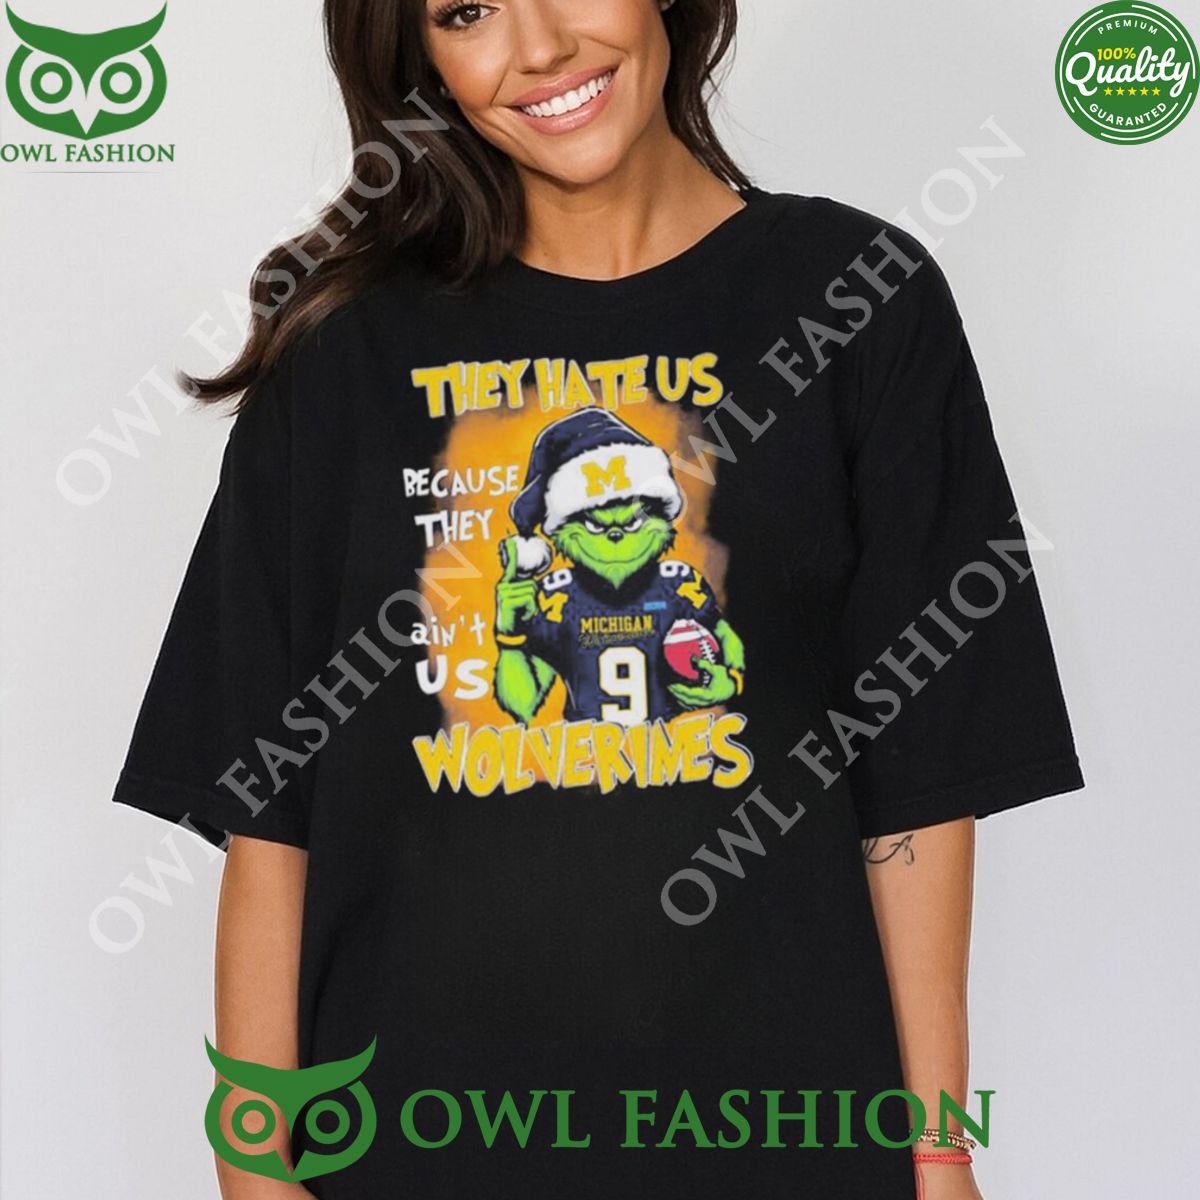 they hate us because aint us wolverines santa grinch christmas t shirt 1 0UFIS.jpg